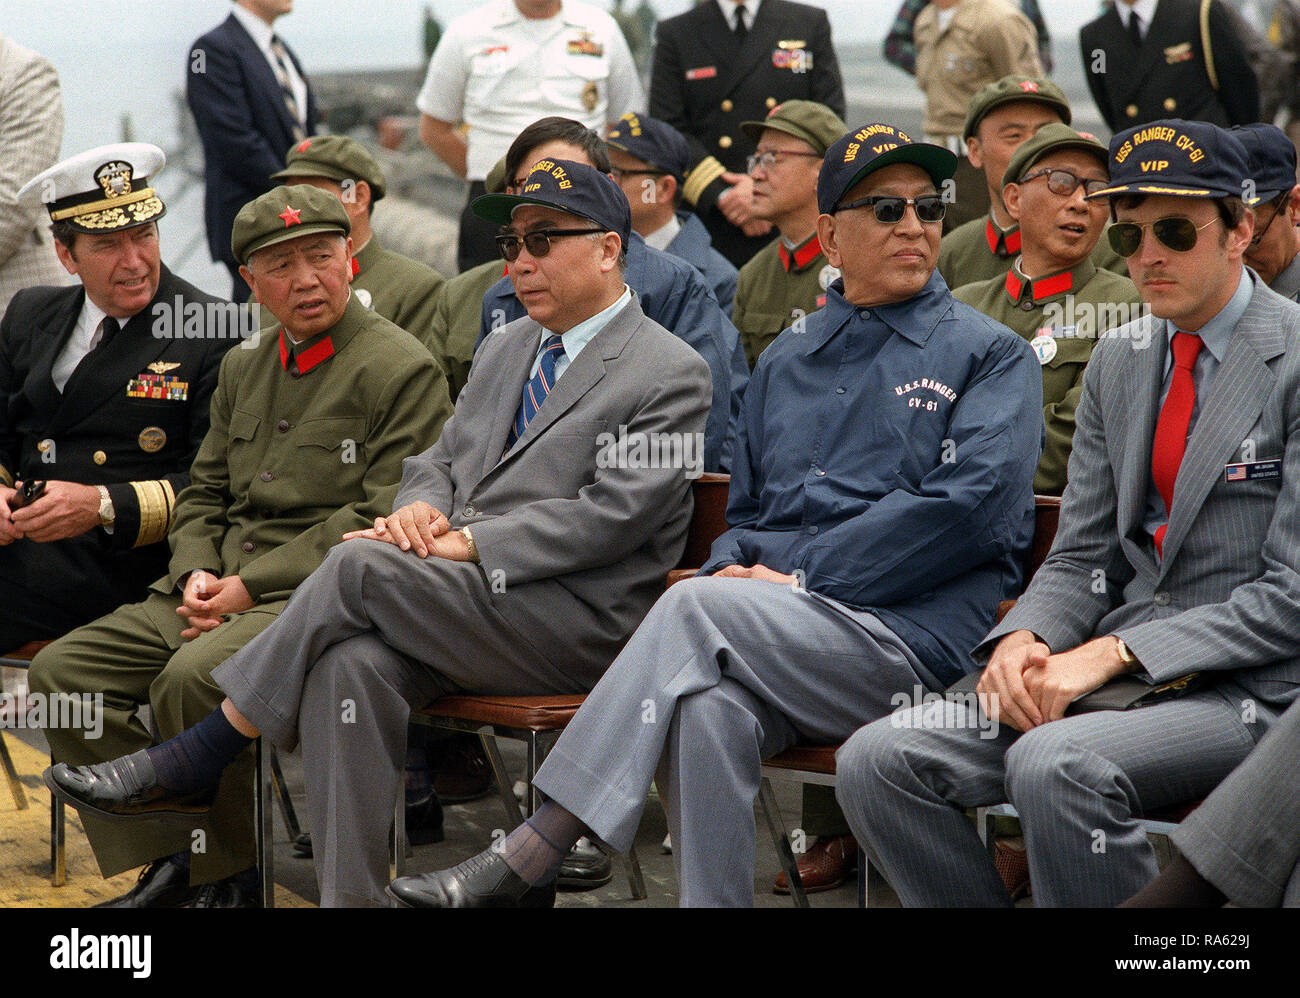 1980 - Vice Premier Geng Biao of China, in the blue jacket, and the Chinese ambassador sit with U.S. Navy officials aboard the aircraft carrier USS RANGER (CV-61).  They are waiting for the start of the air and sea demonstration. Stock Photo